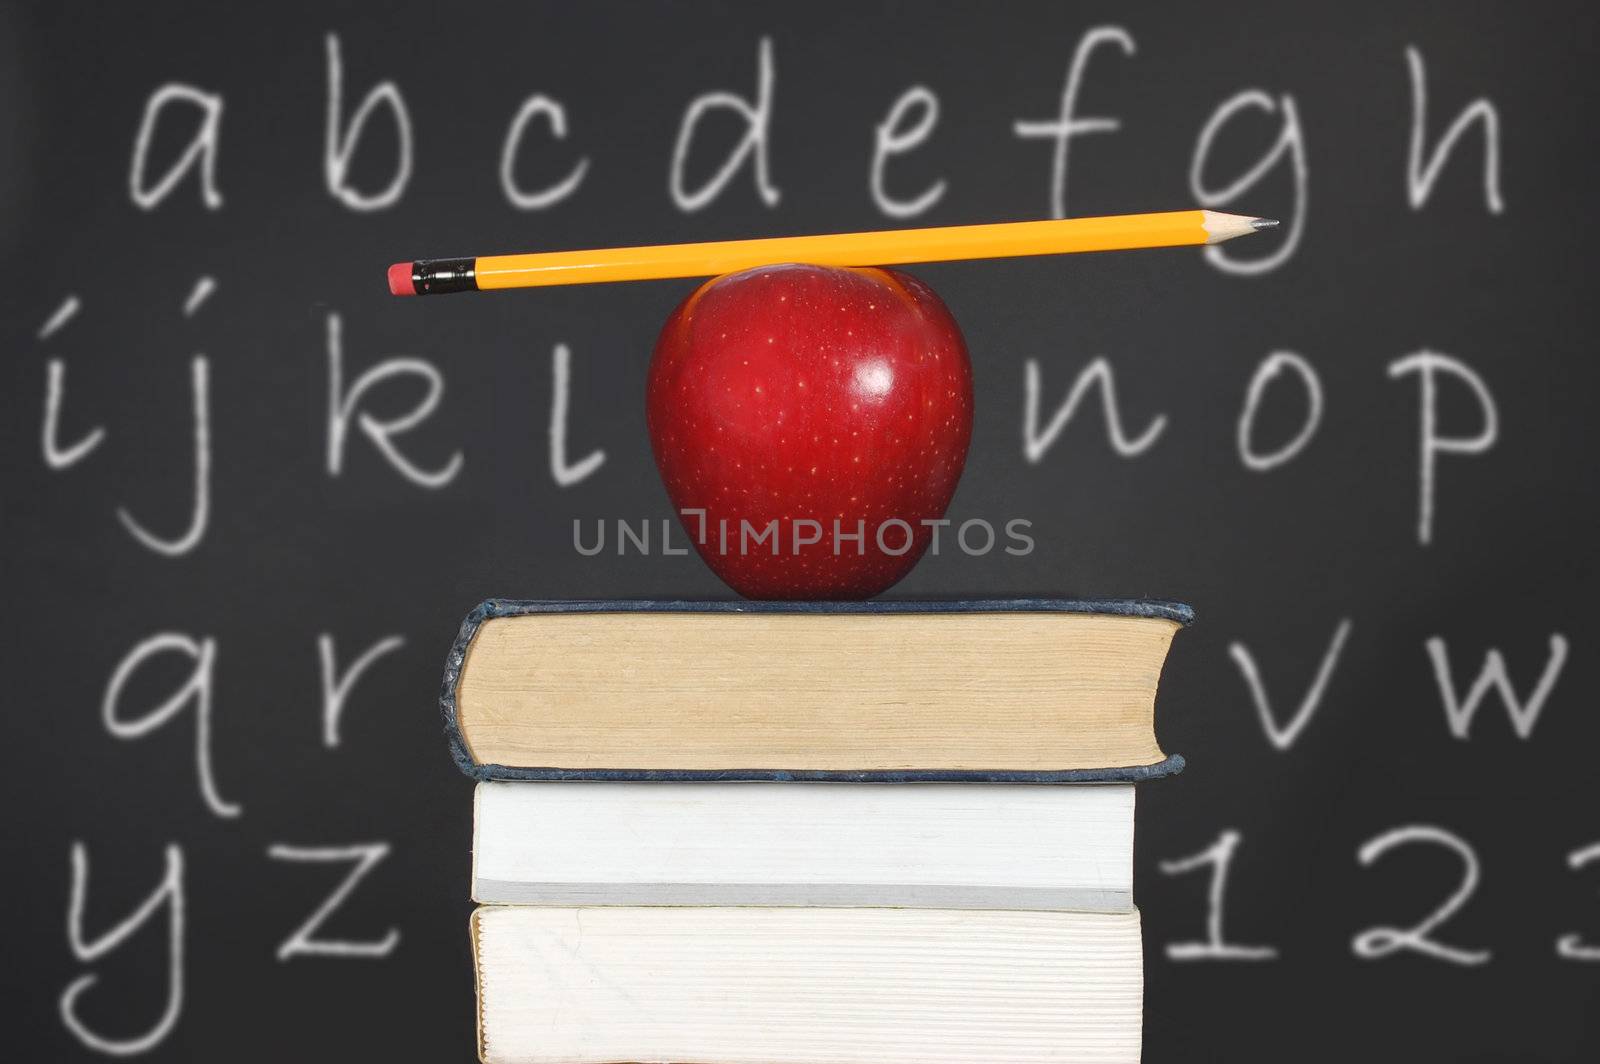 Pencil balancing on an apple and a stack of books